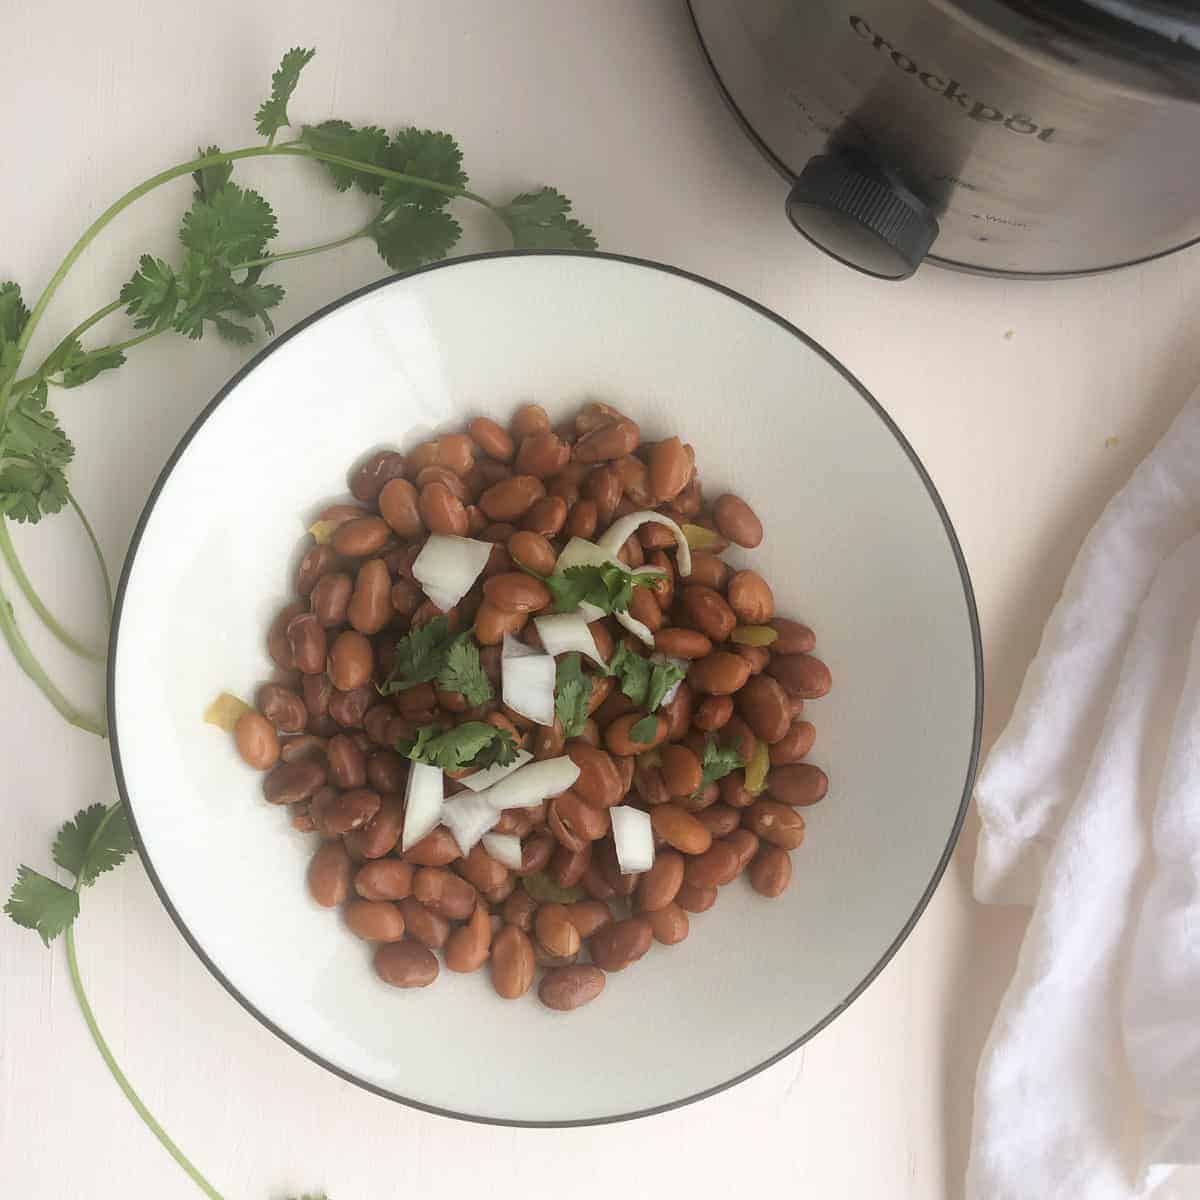 2-Quart Slow Cooker Recipe for Spicy Canned Pinto Beans